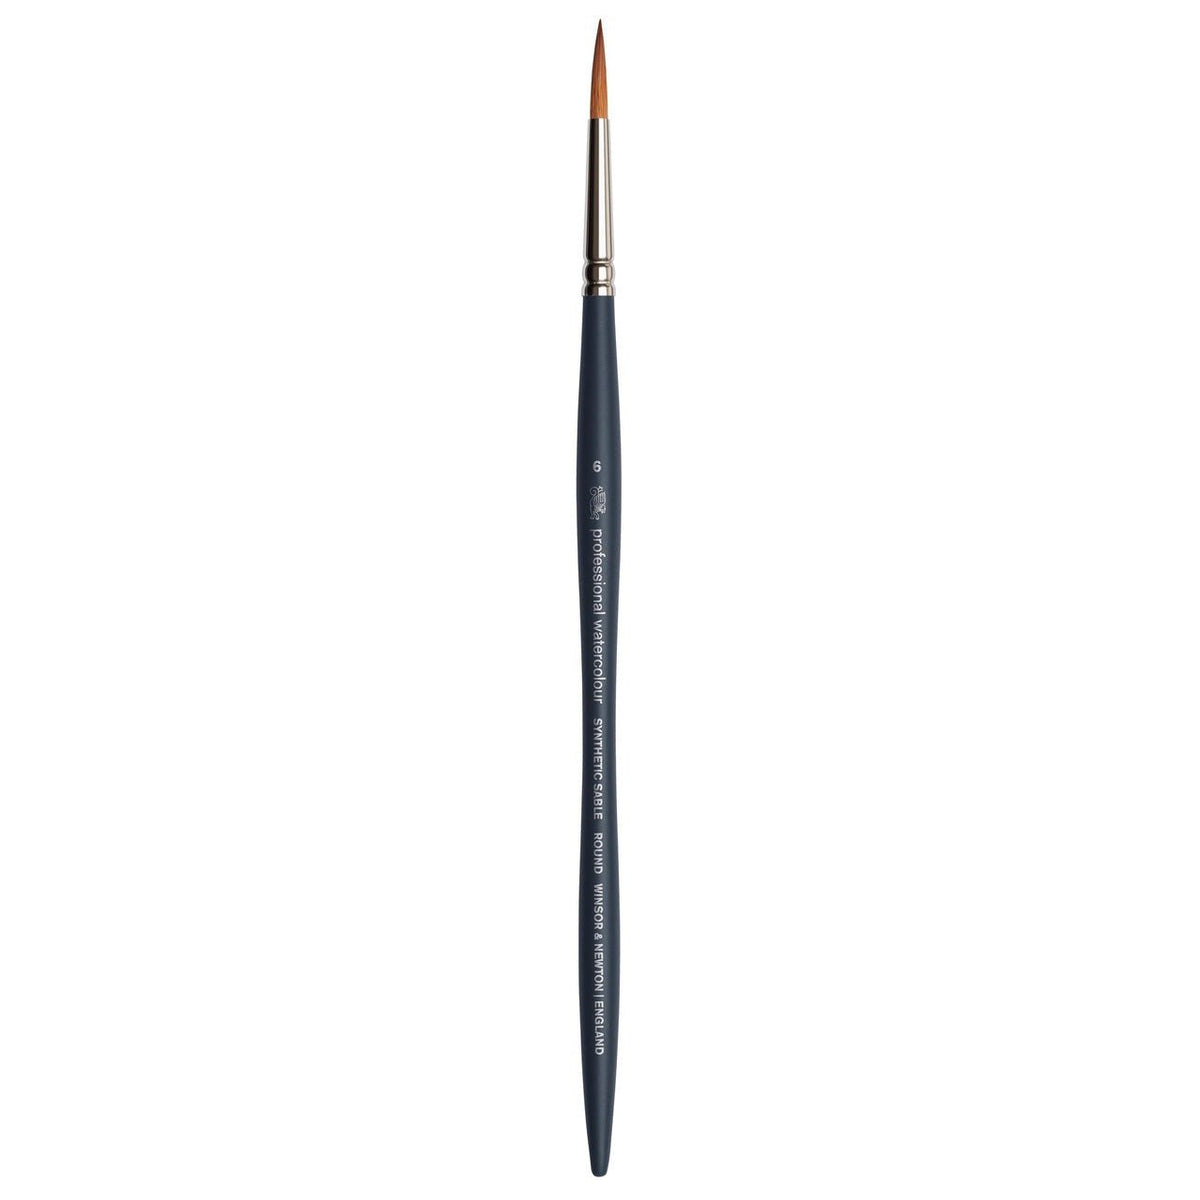 Winsor & Newton Professional Watercolor Synthetic Sable Brush Round 6